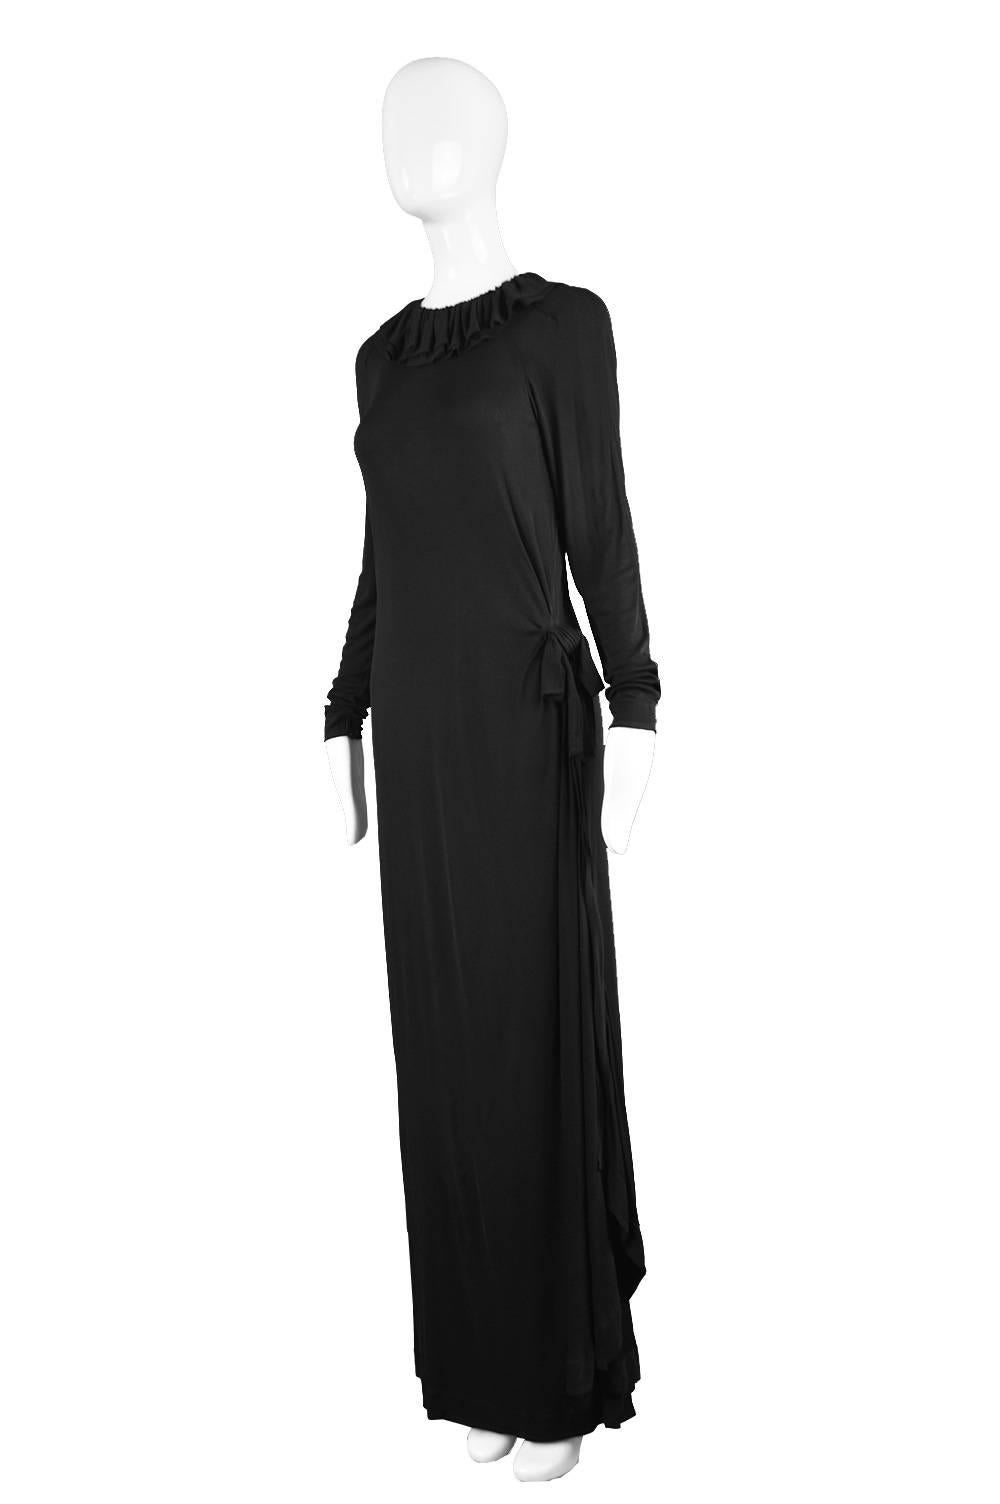 Jean Muir Black Draped Rayon Jersey Vintage Dress with Side Train, 1970s In Good Condition For Sale In Doncaster, South Yorkshire